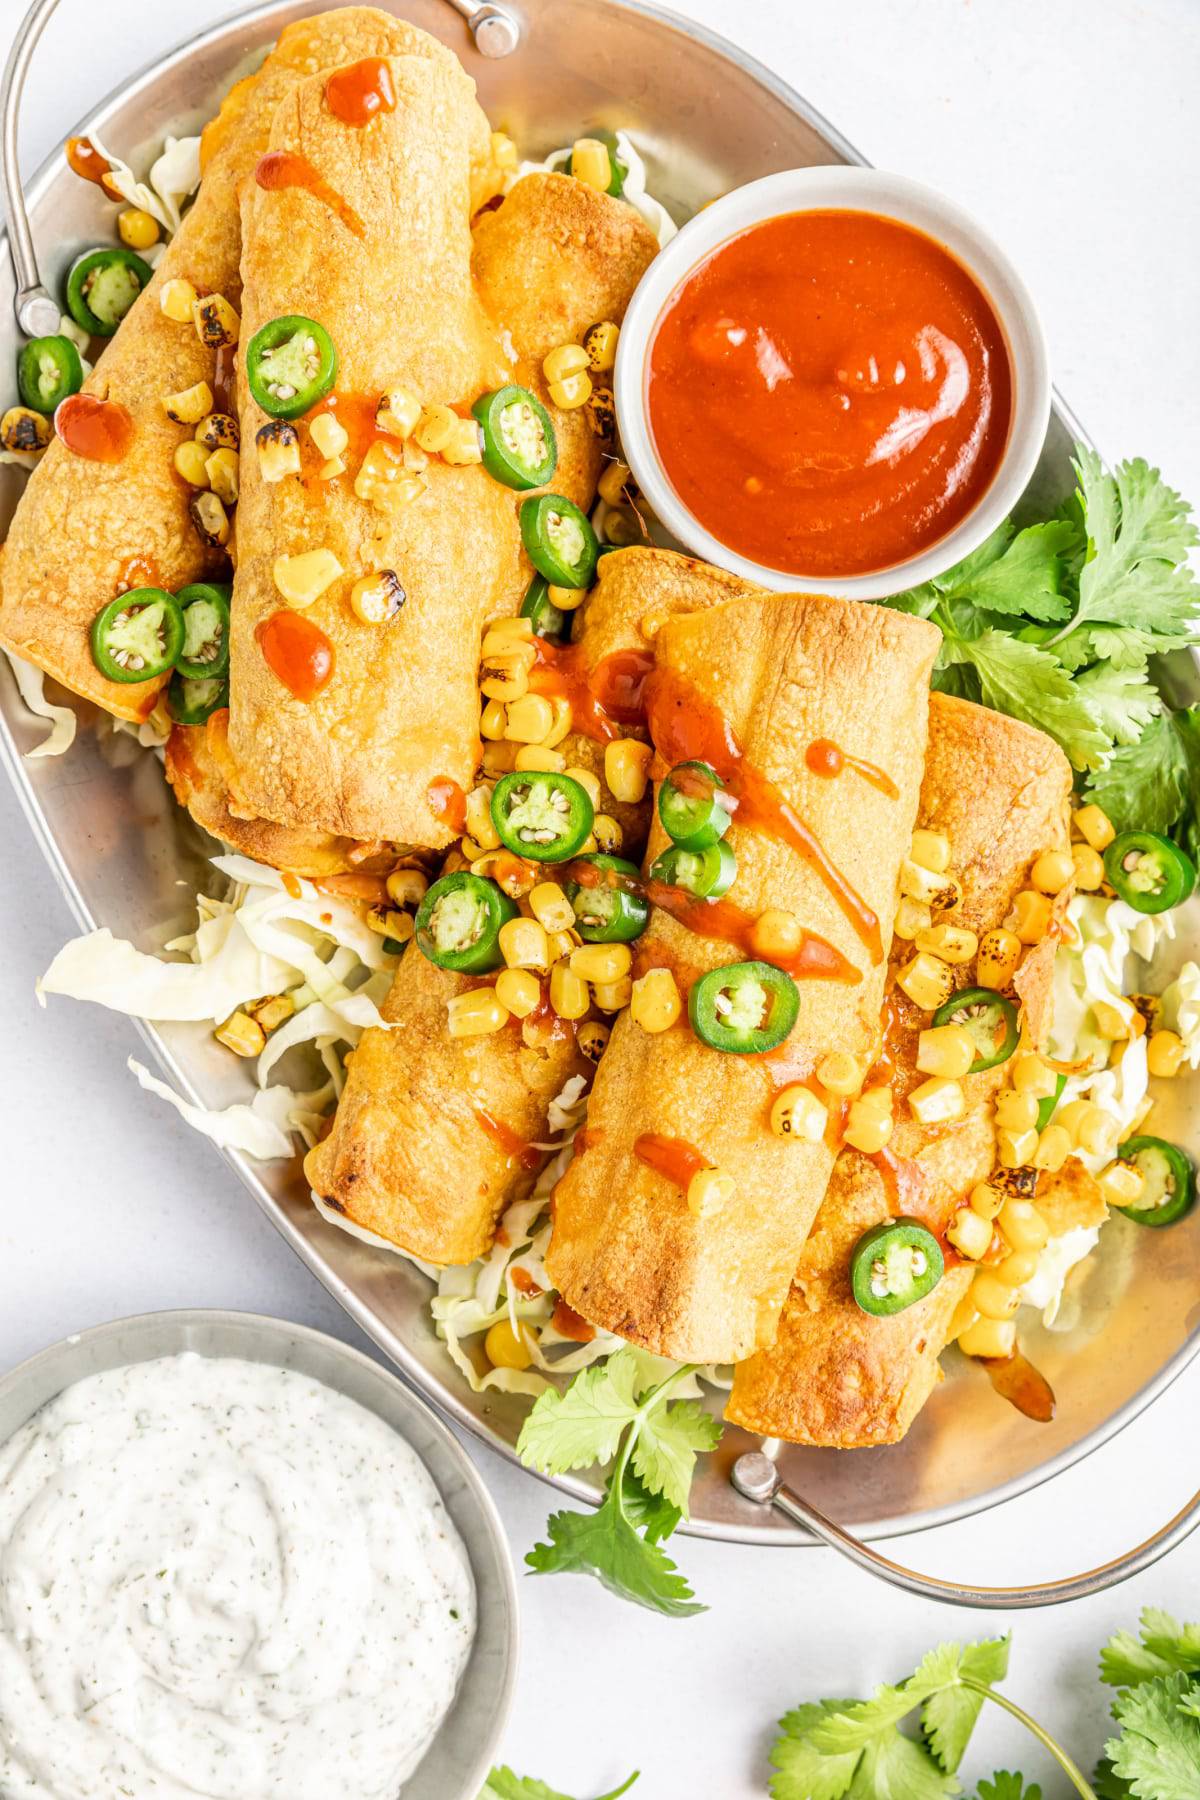 Overhead view of BBQ jackfruit taquitos piled onto a silver platter, topped with fire roasted corn, jalapeno slices, cilantro, and a drizzle of BBQ sauce. Small bowls of BBQ sauce and ranch dressing on the side.  